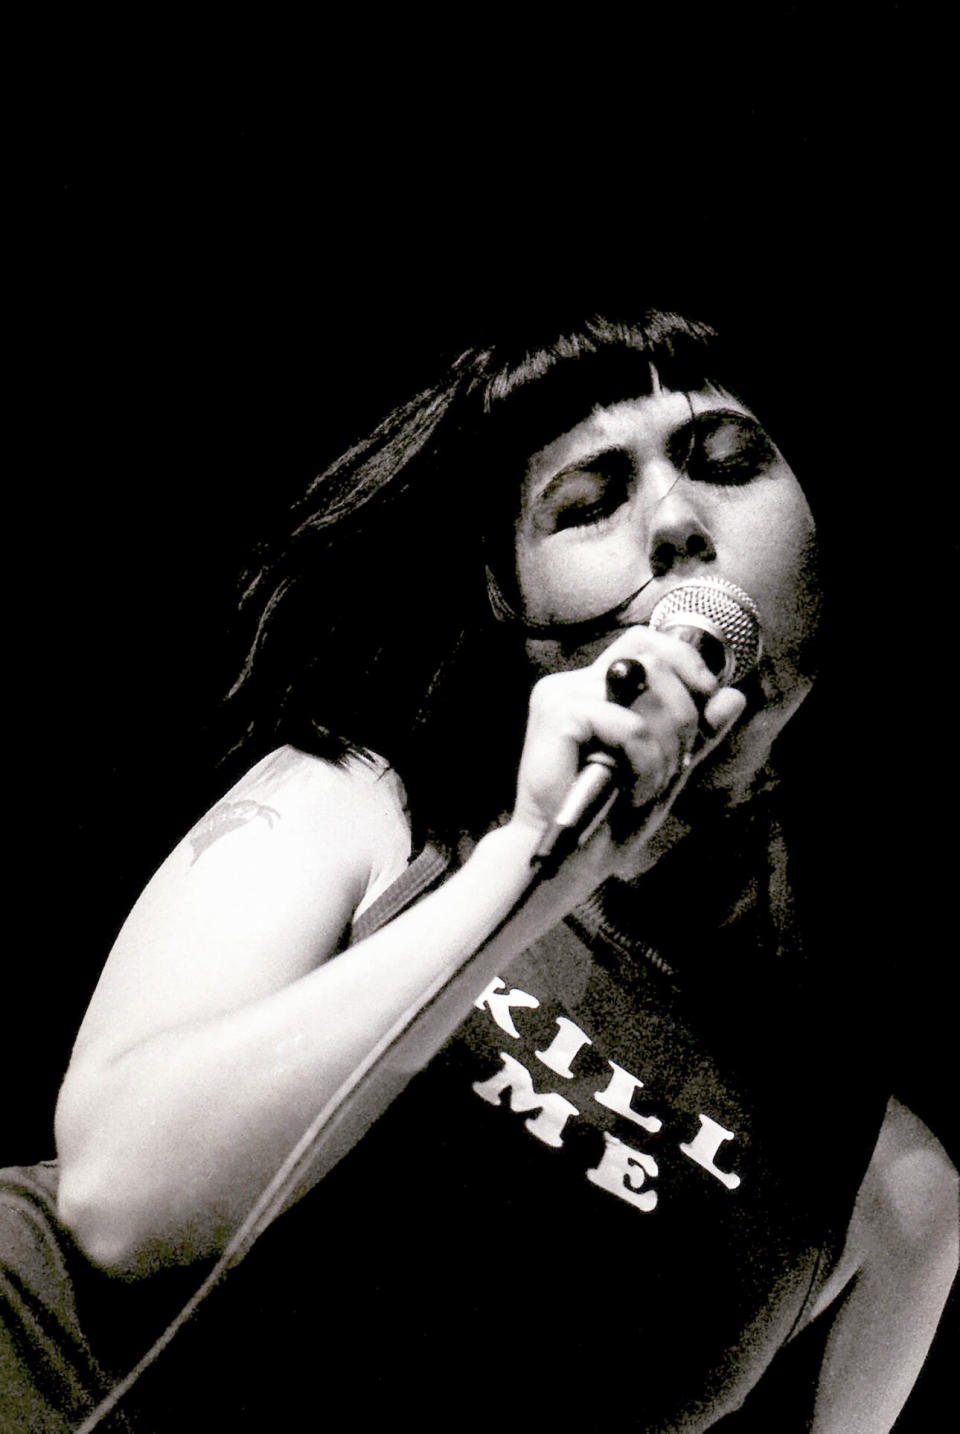 Hanna performing with Bikini Kill for Rock for Choice at the Los Angeles Hollywood Palladium on April 30, 1993. (Credit: Lindsay Brice/Getty Images)